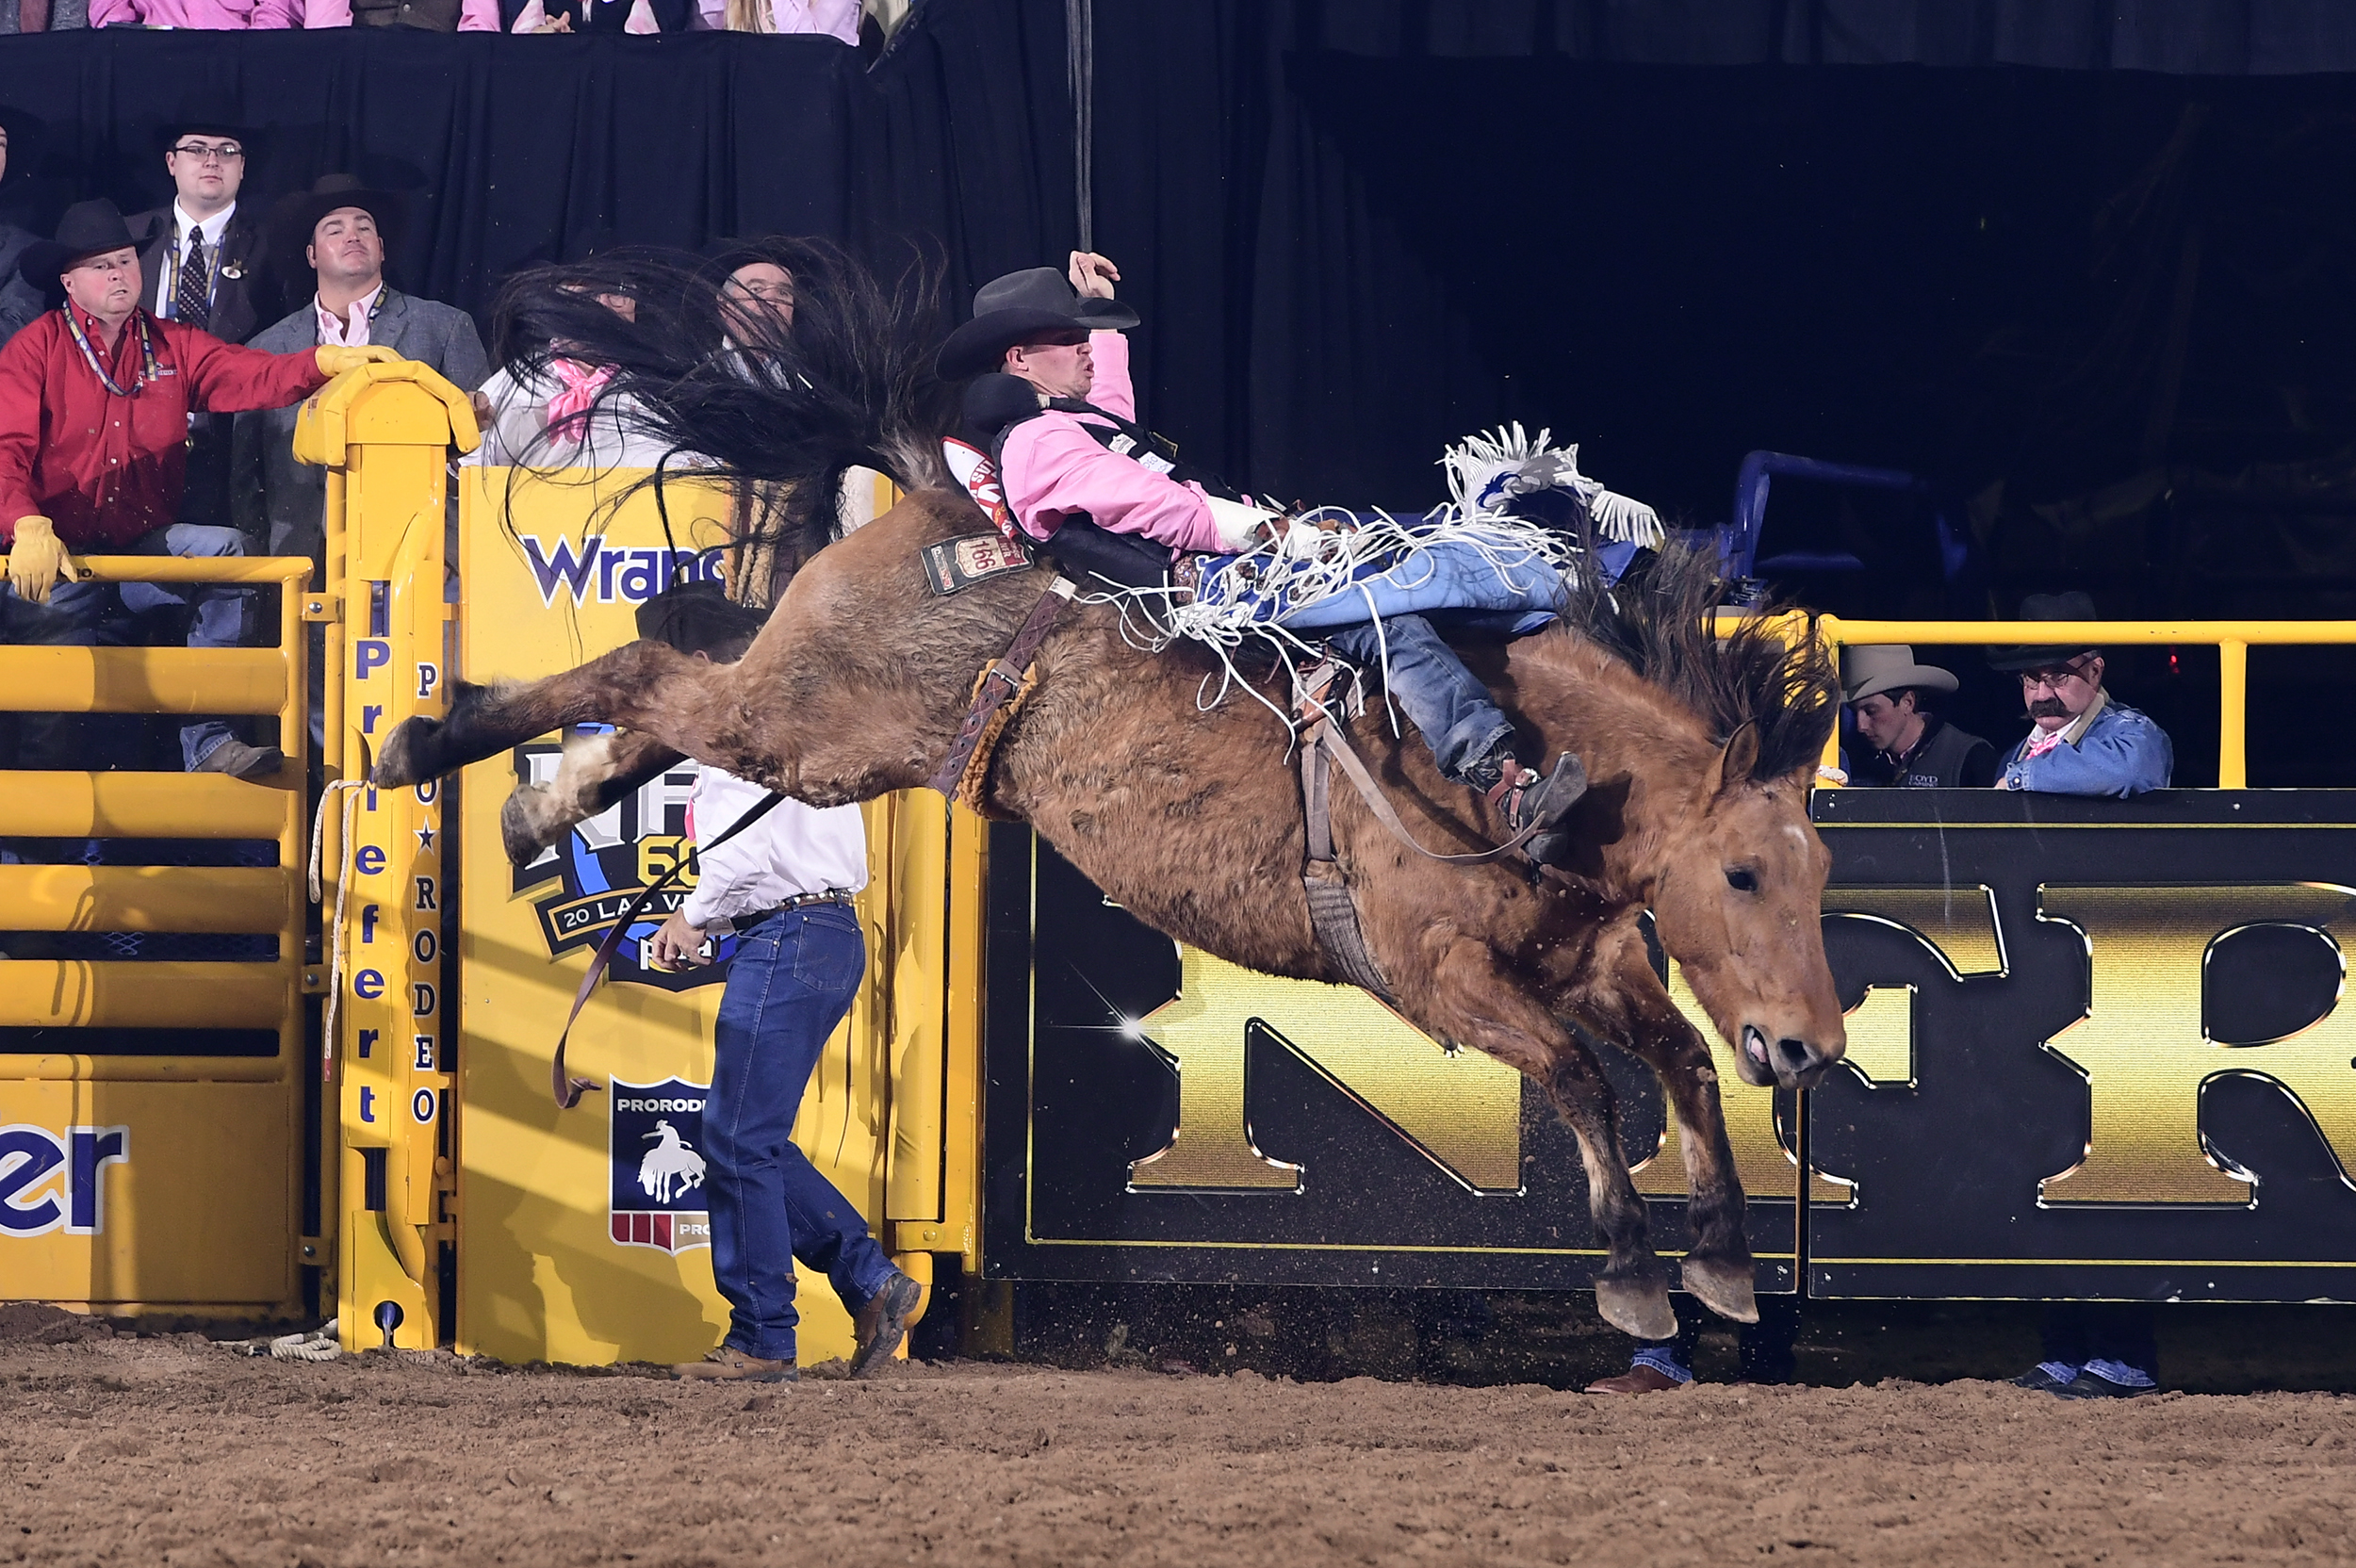 Orin Larsen rides Painted River for 87 points to finish sixth during Monday's fifth round of the National Finals Rodeo. It's his second payday of this year's NFR. (PRCA PRORODEO PHOTO BY JAMES PHIFER)